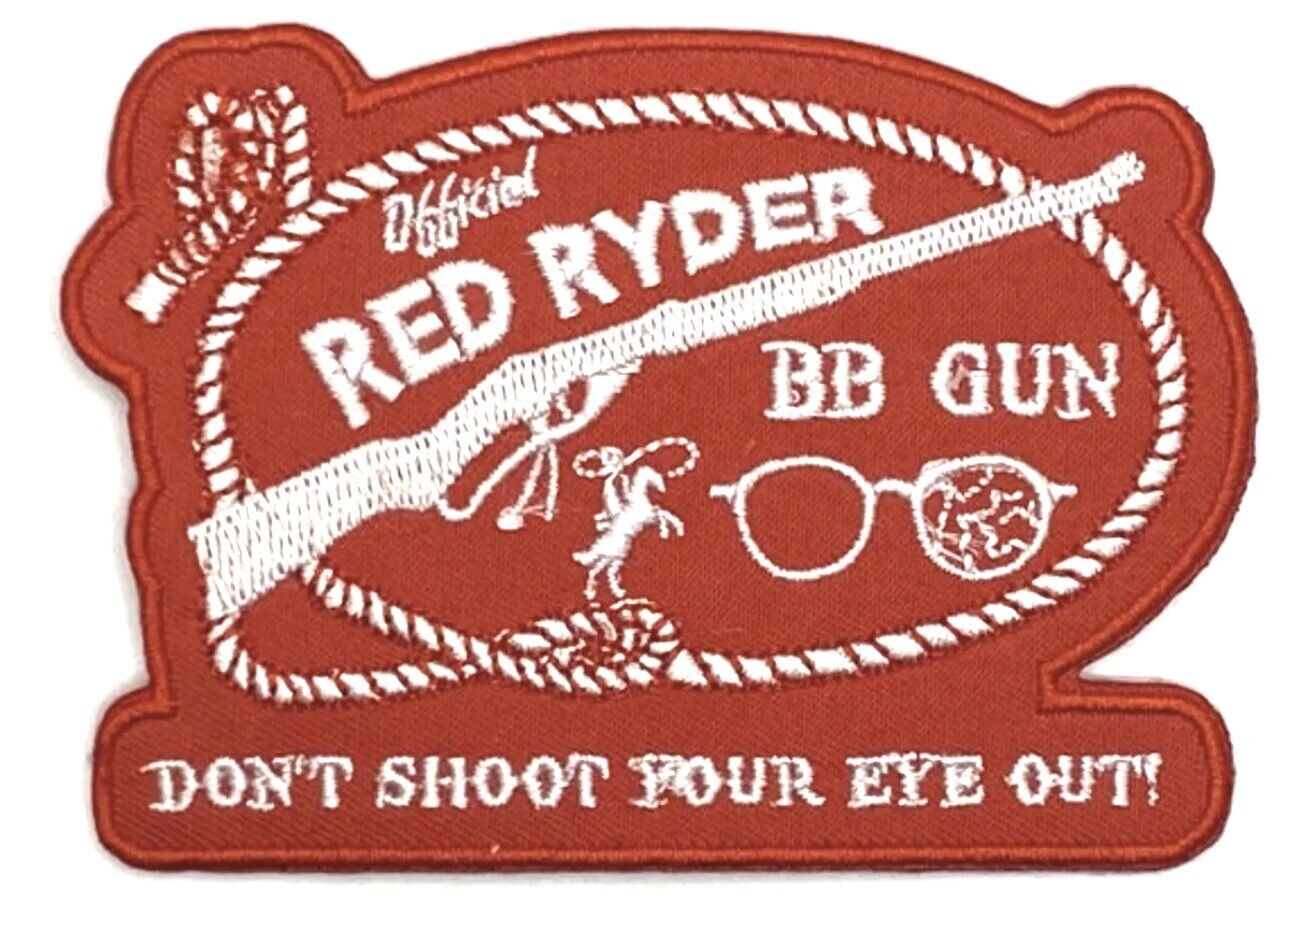 Red Ryder BB Gun Christmas Story Iron Sew Patch Vintage Style Retro